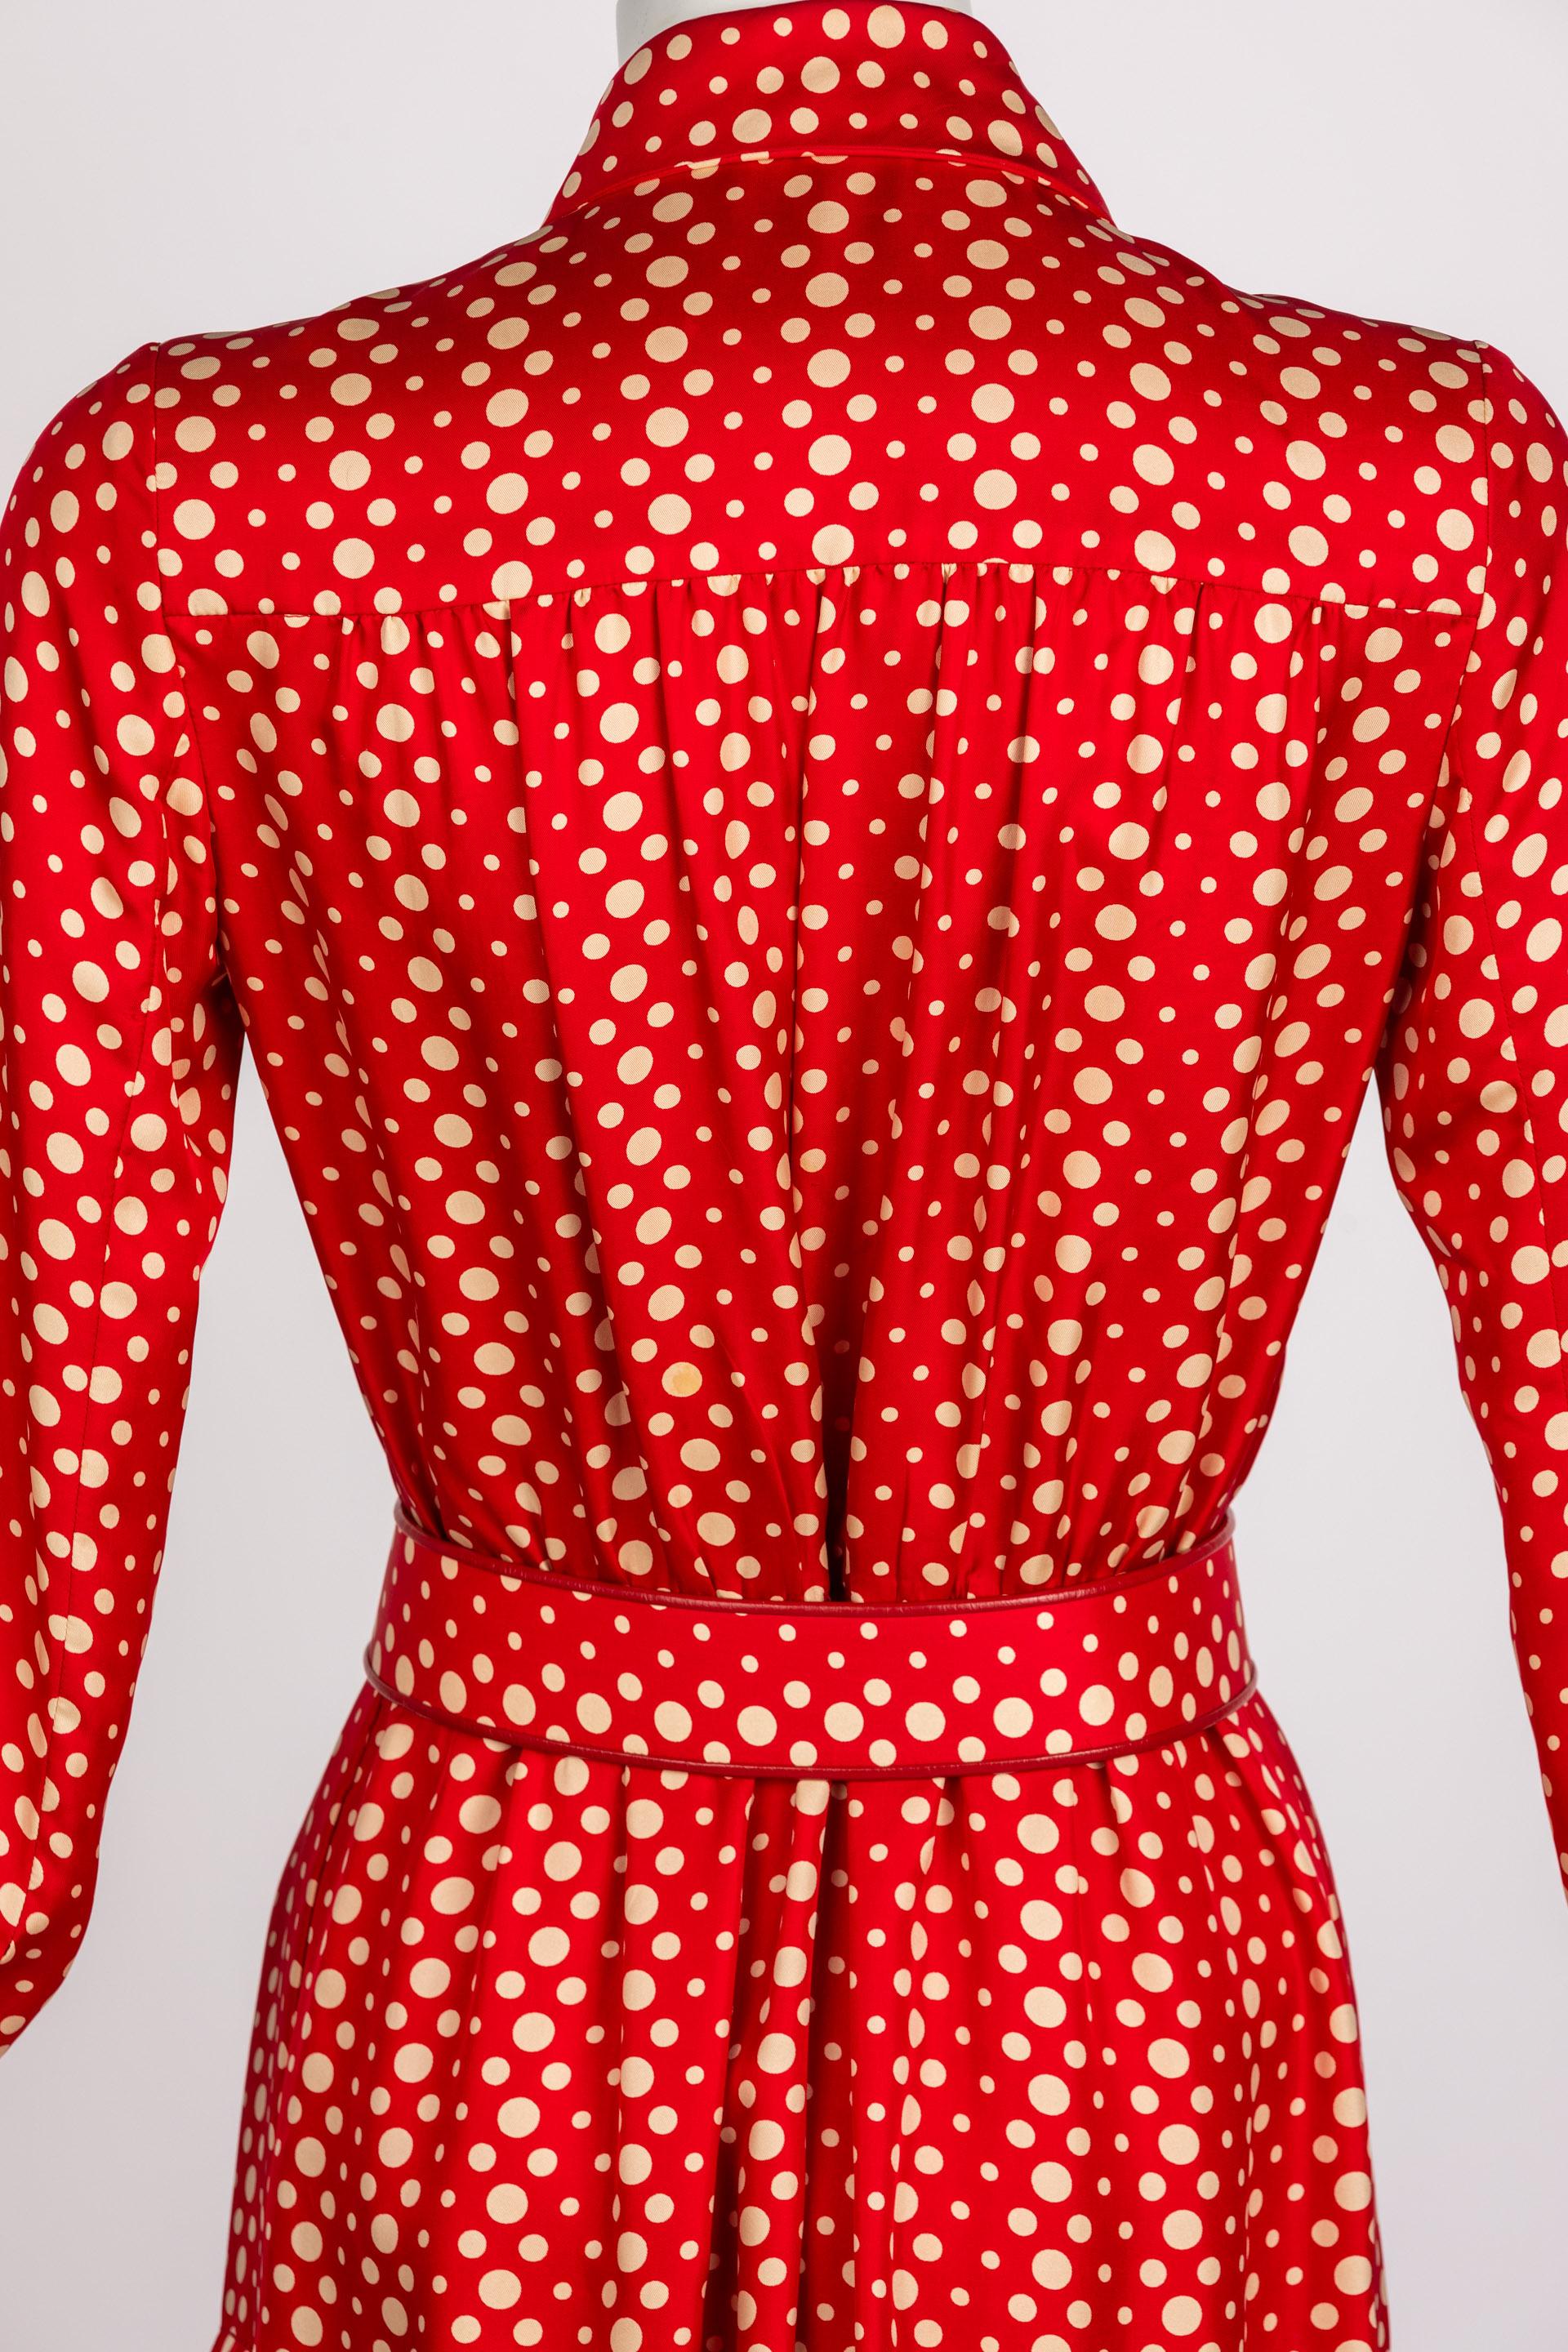 Galanos Red Polka Dot Lucite Belted Silk Maxi Dress, 1970s For Sale 7